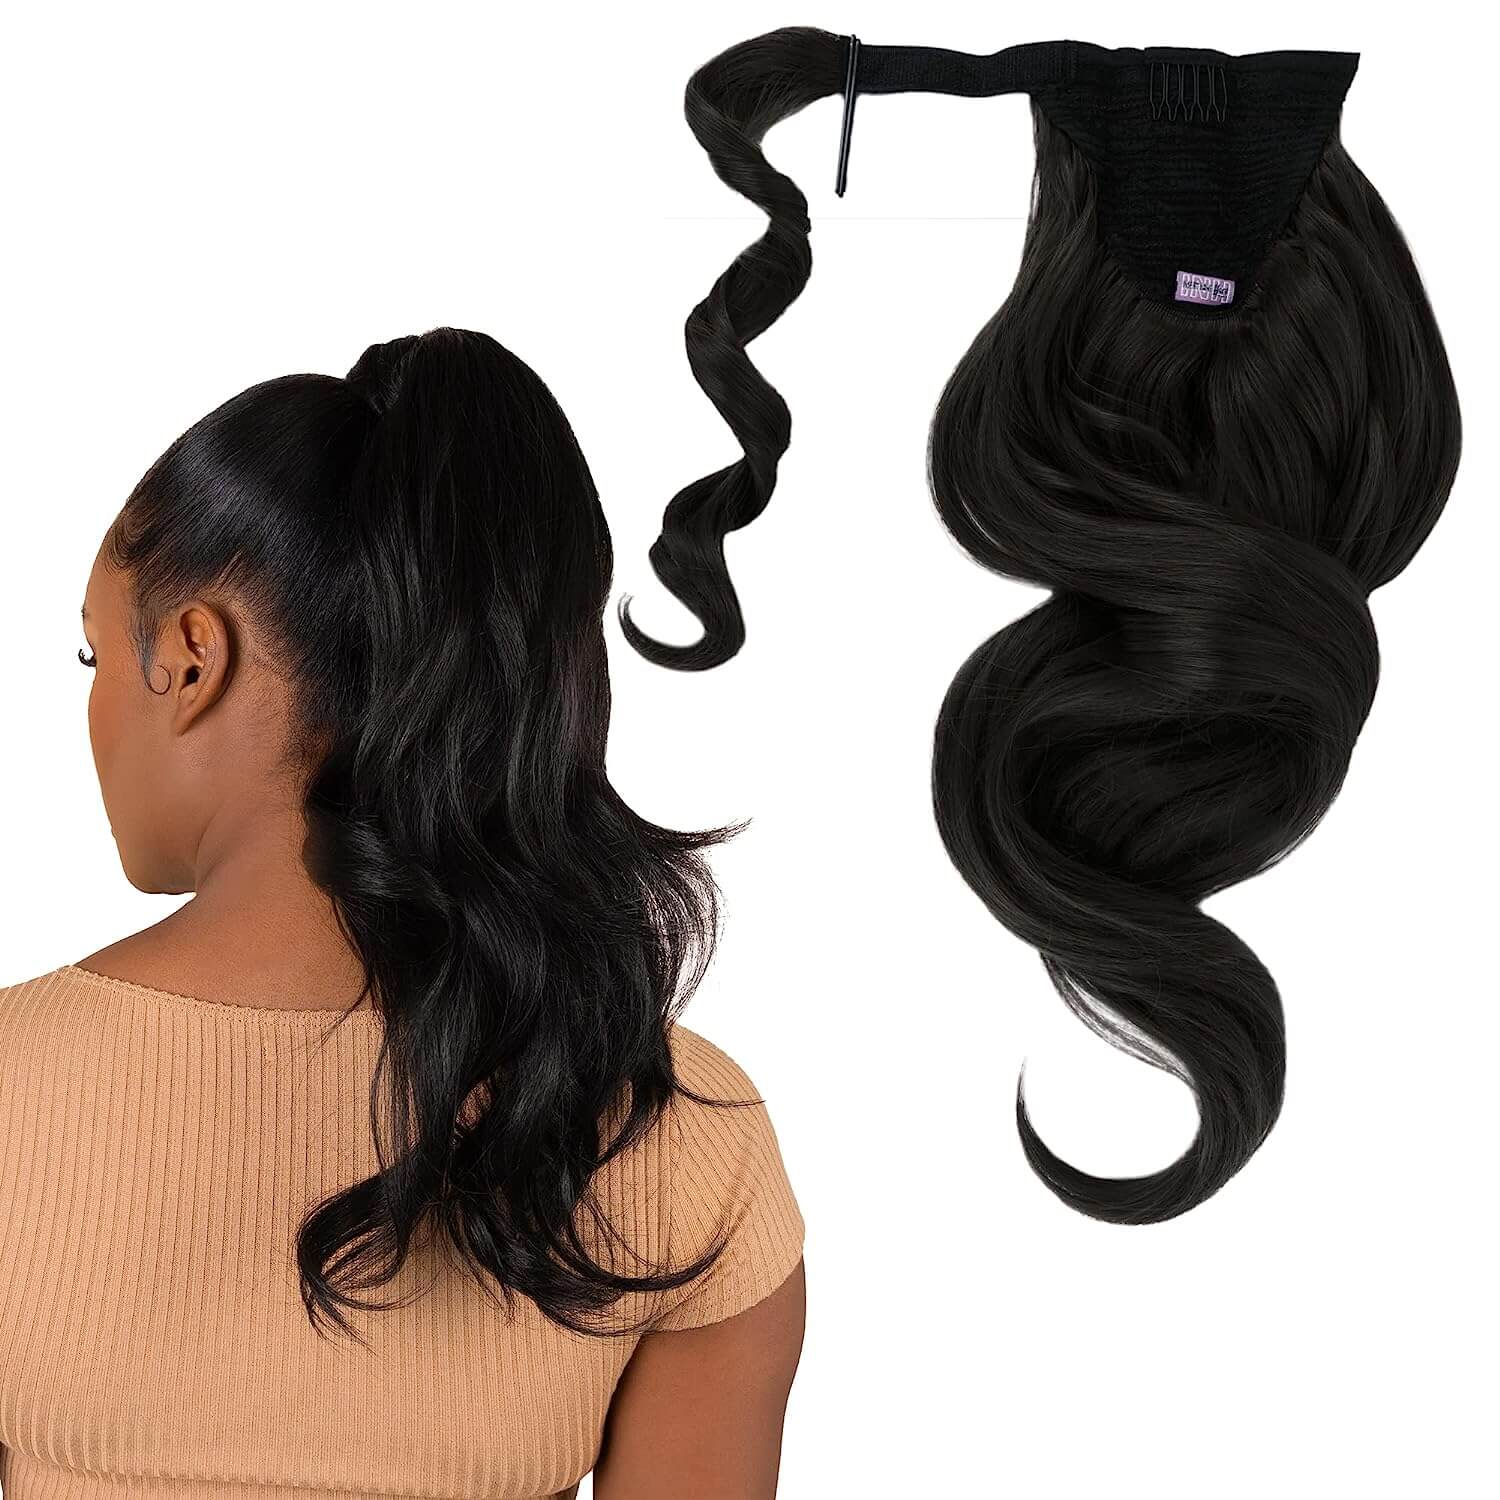  Insert Name Here (INH) 18-inch Ponytail Extensions in jet black